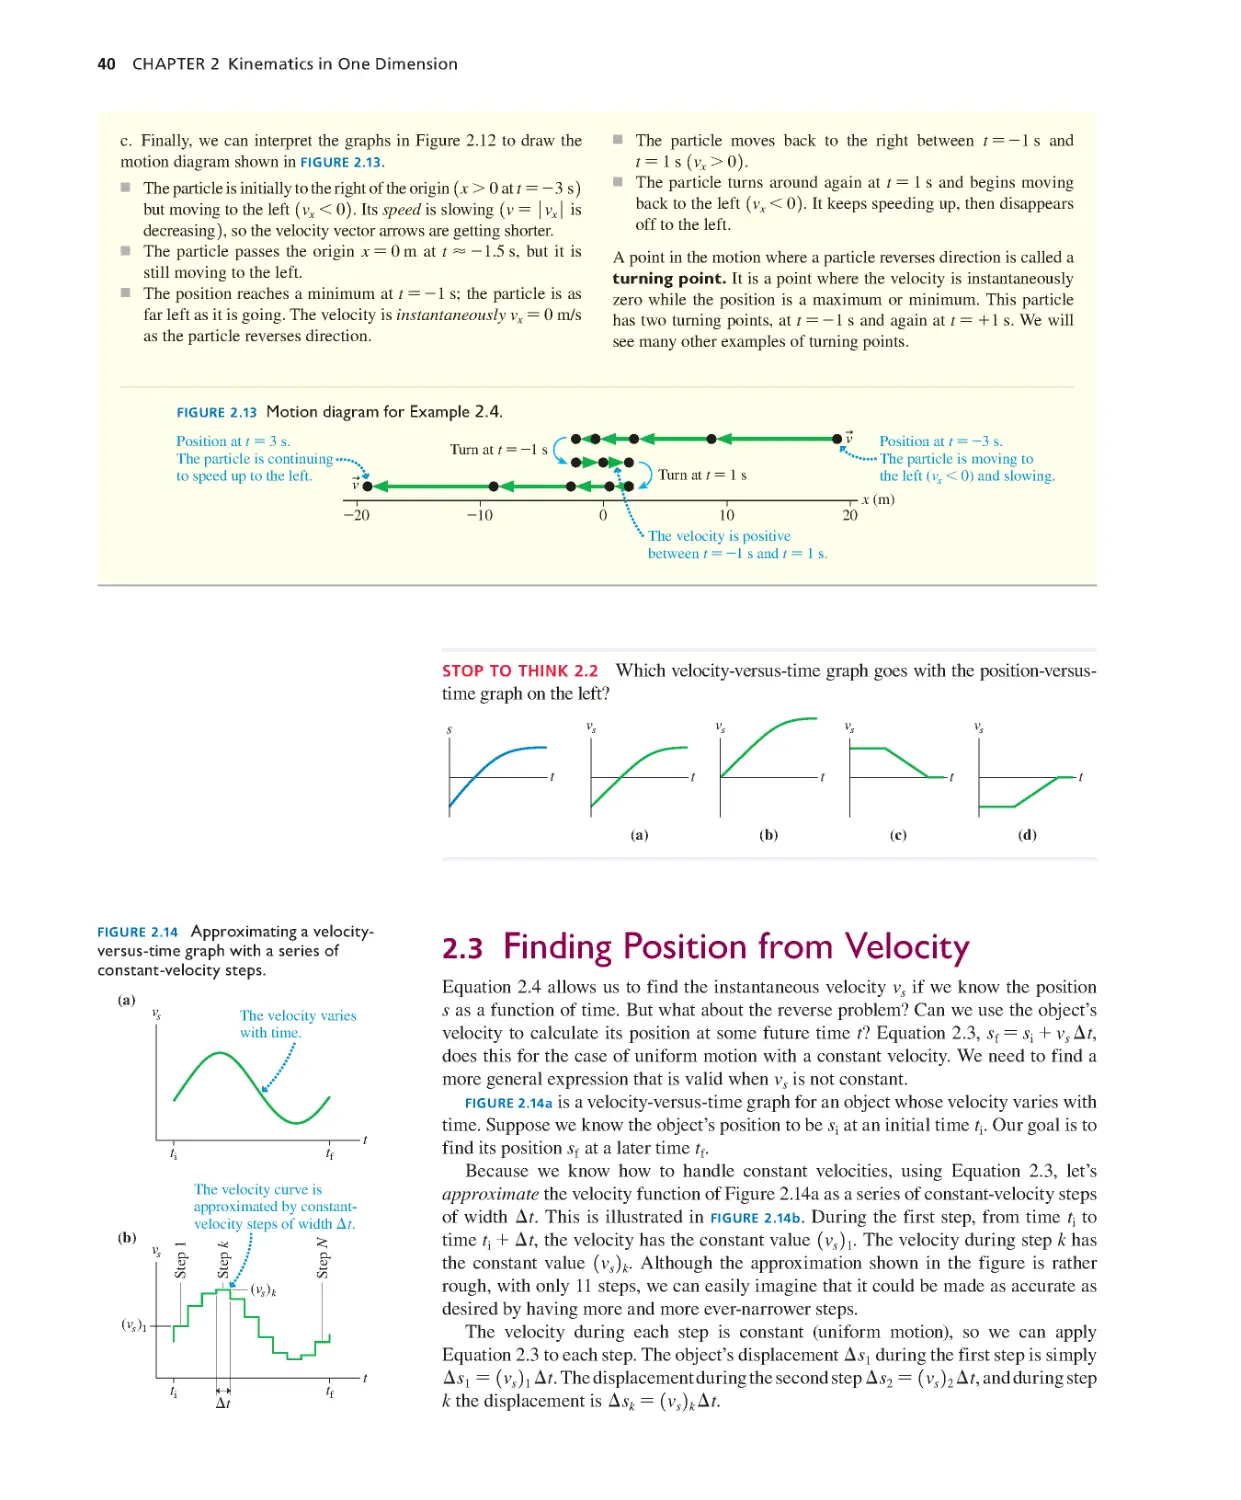 2.3. Finding Position from Velocity